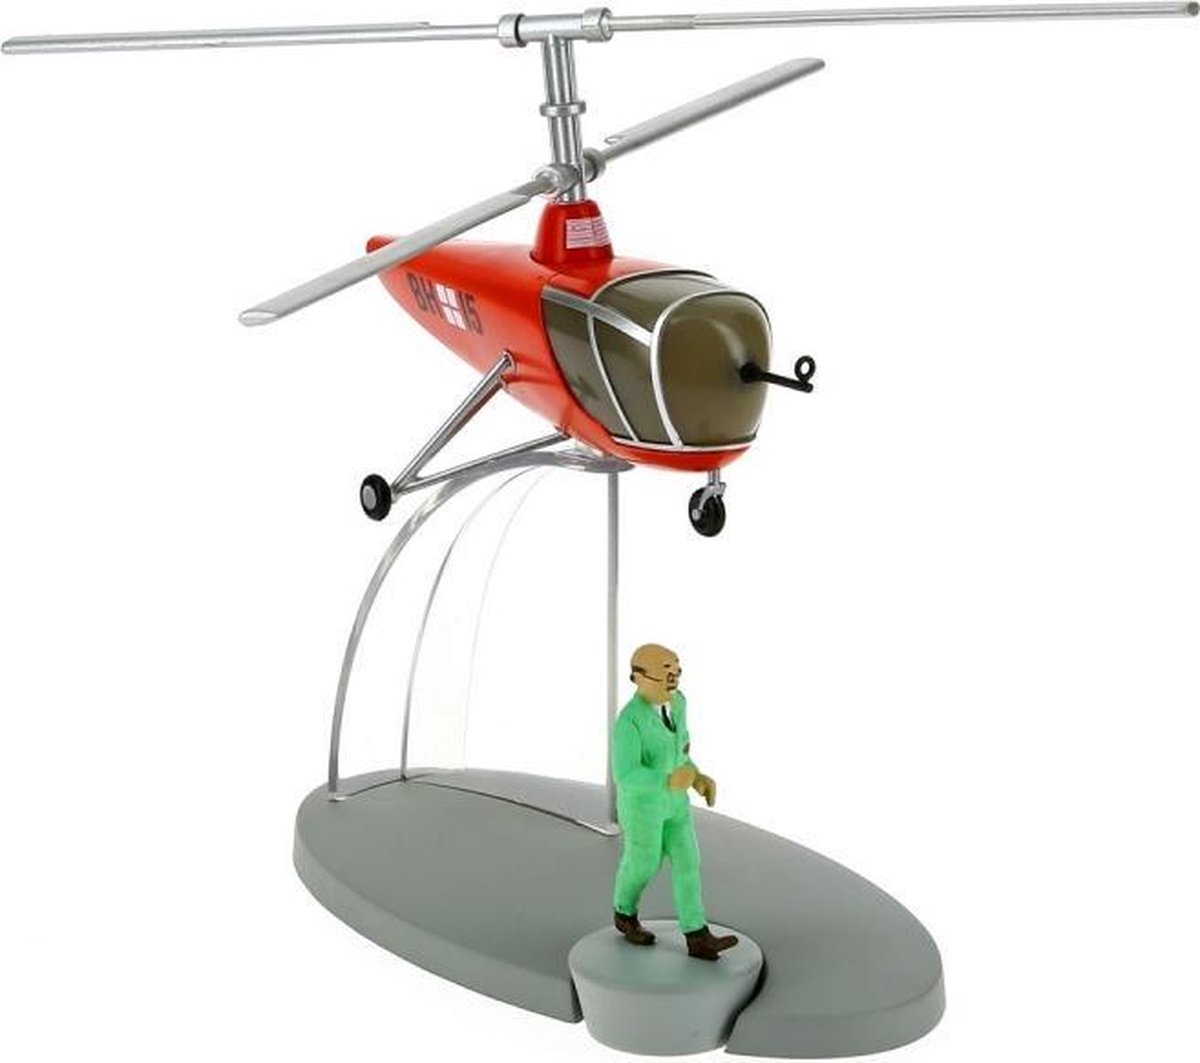 Kuifje / Tintin - Sprodj BH15 helicopter met Frank Wolff figuur (Moulinsart)